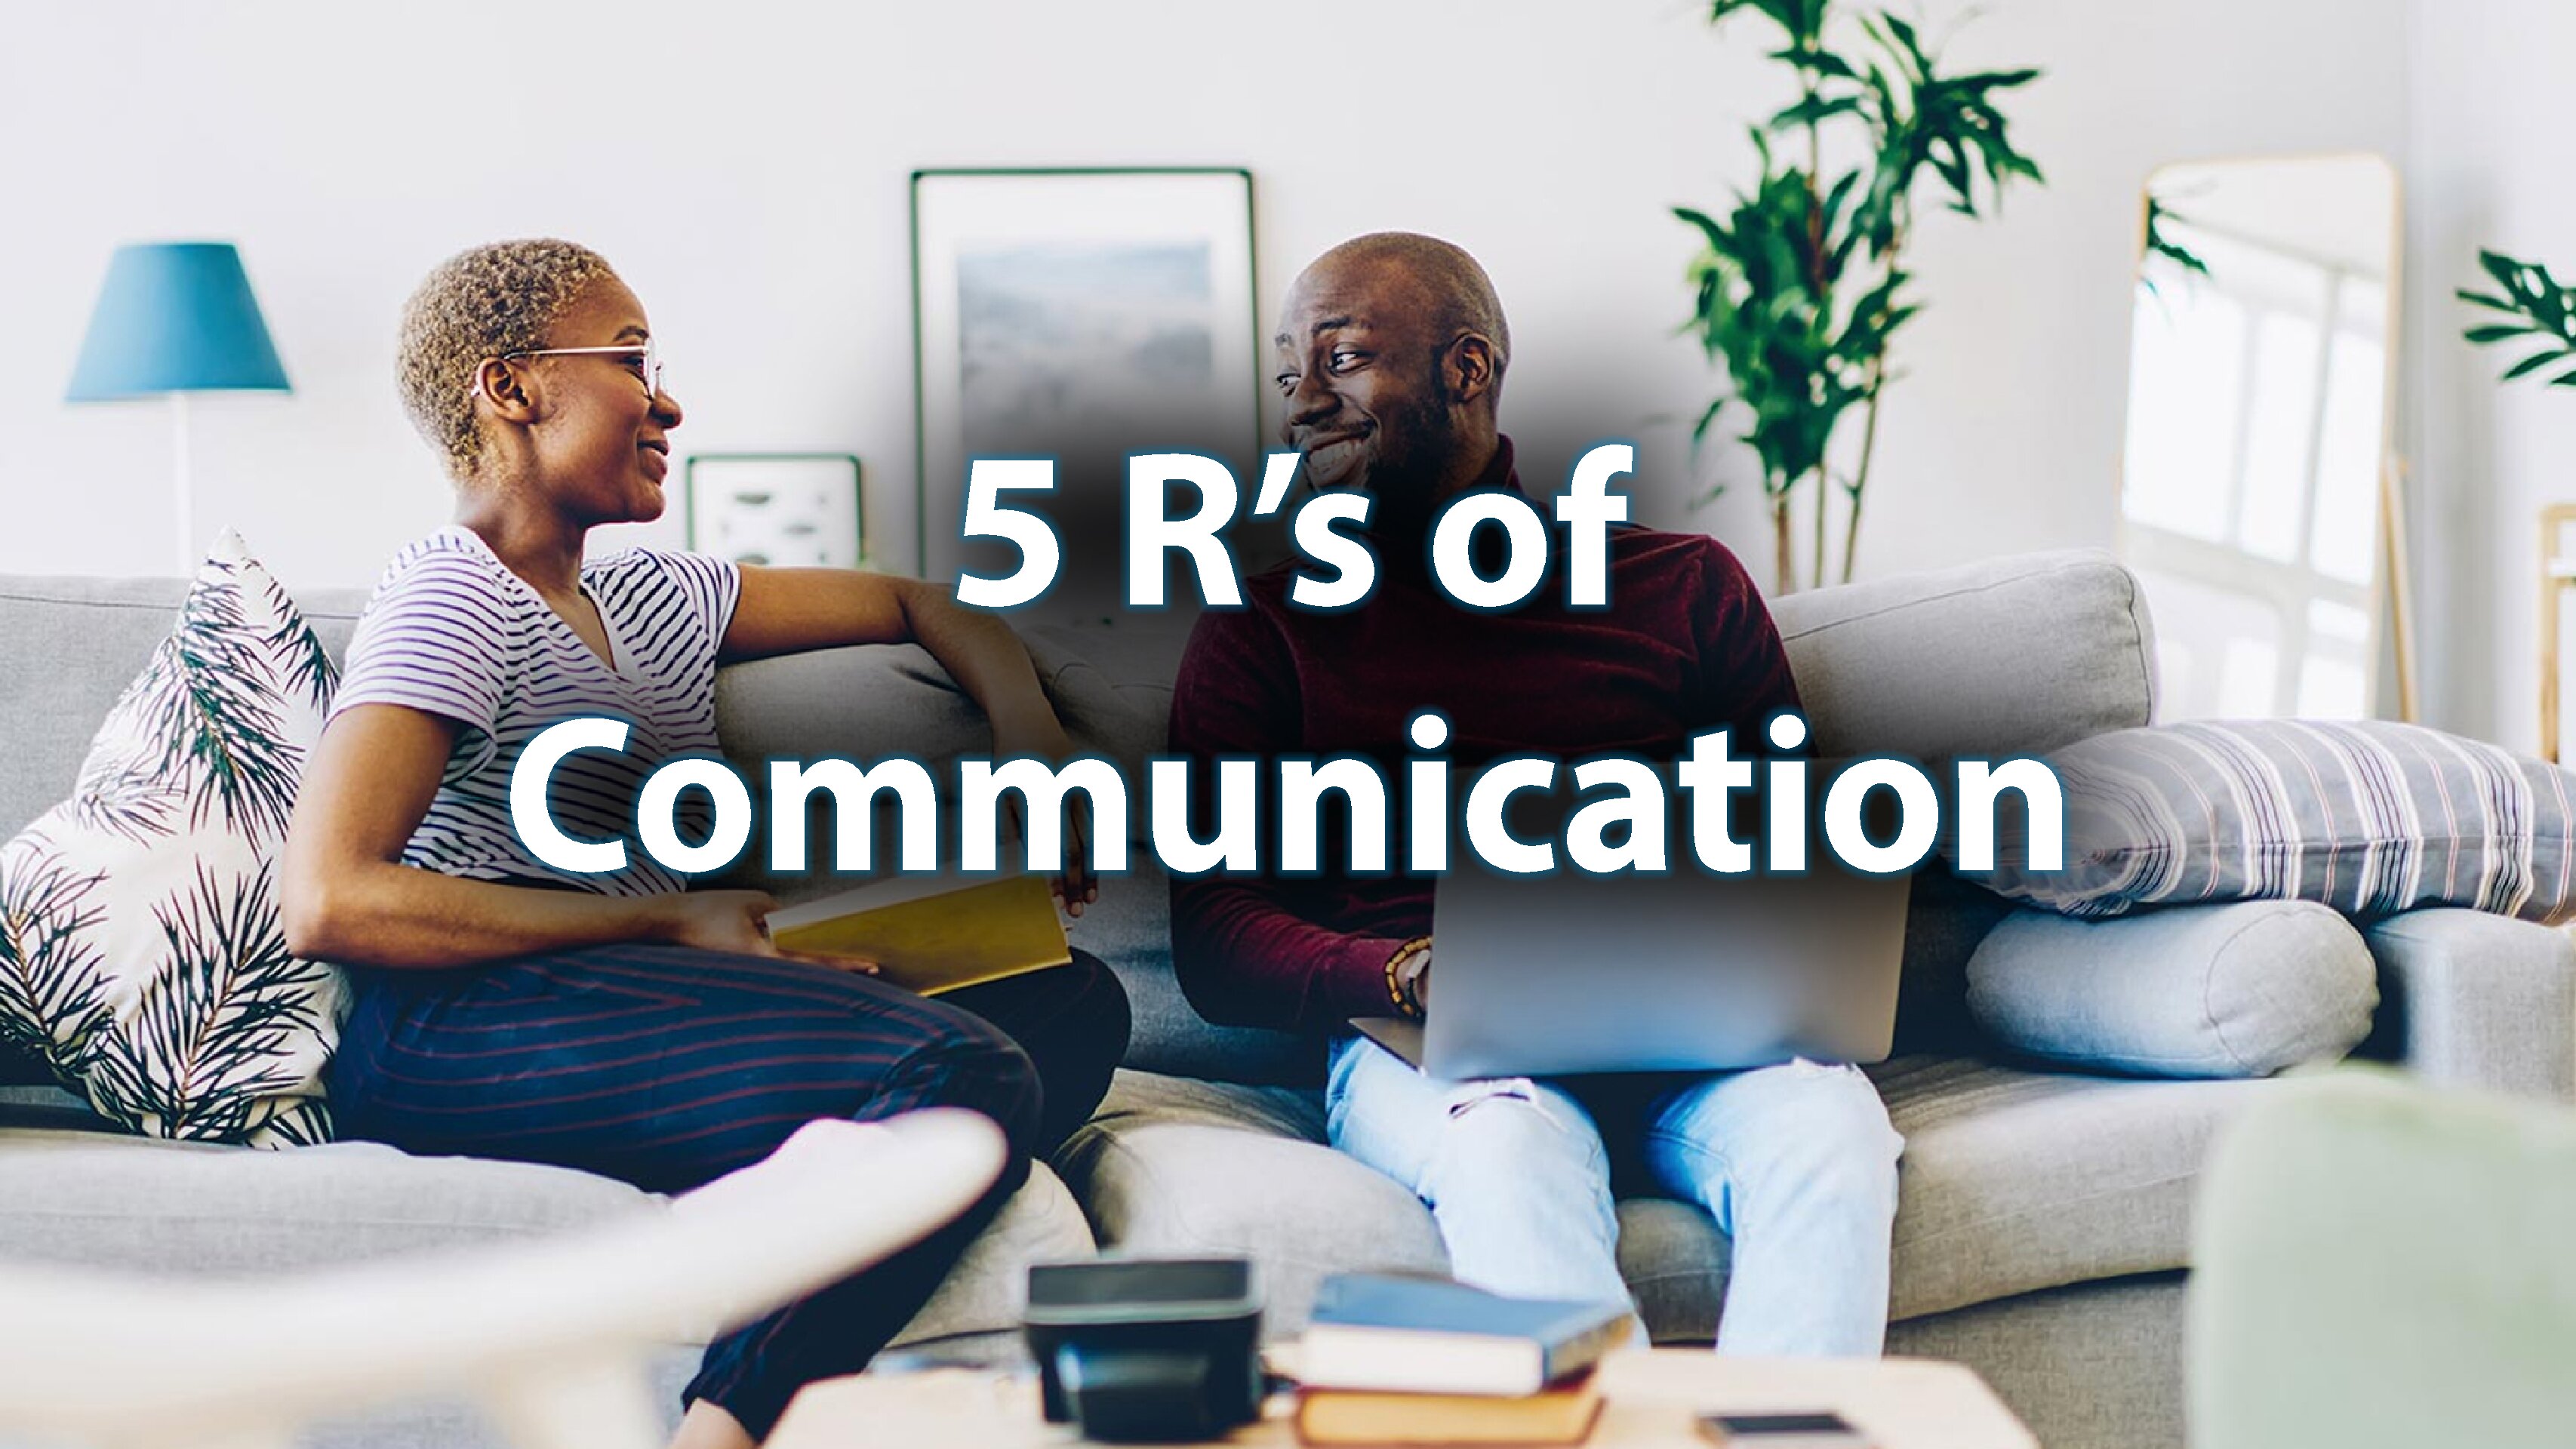 Day 8: 5 R’s of Communication